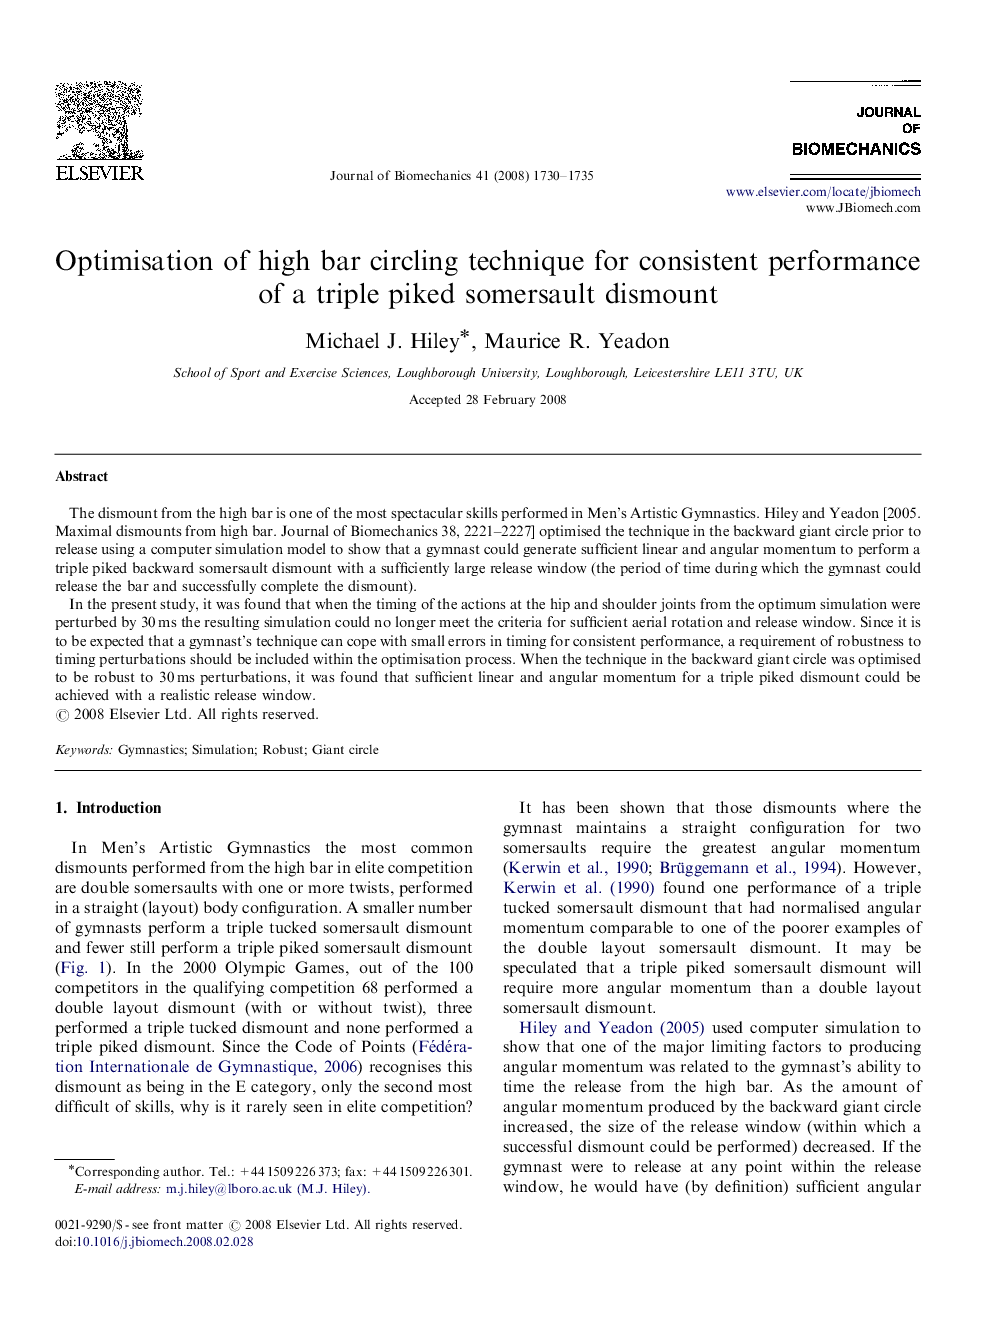 Optimisation of high bar circling technique for consistent performance of a triple piked somersault dismount